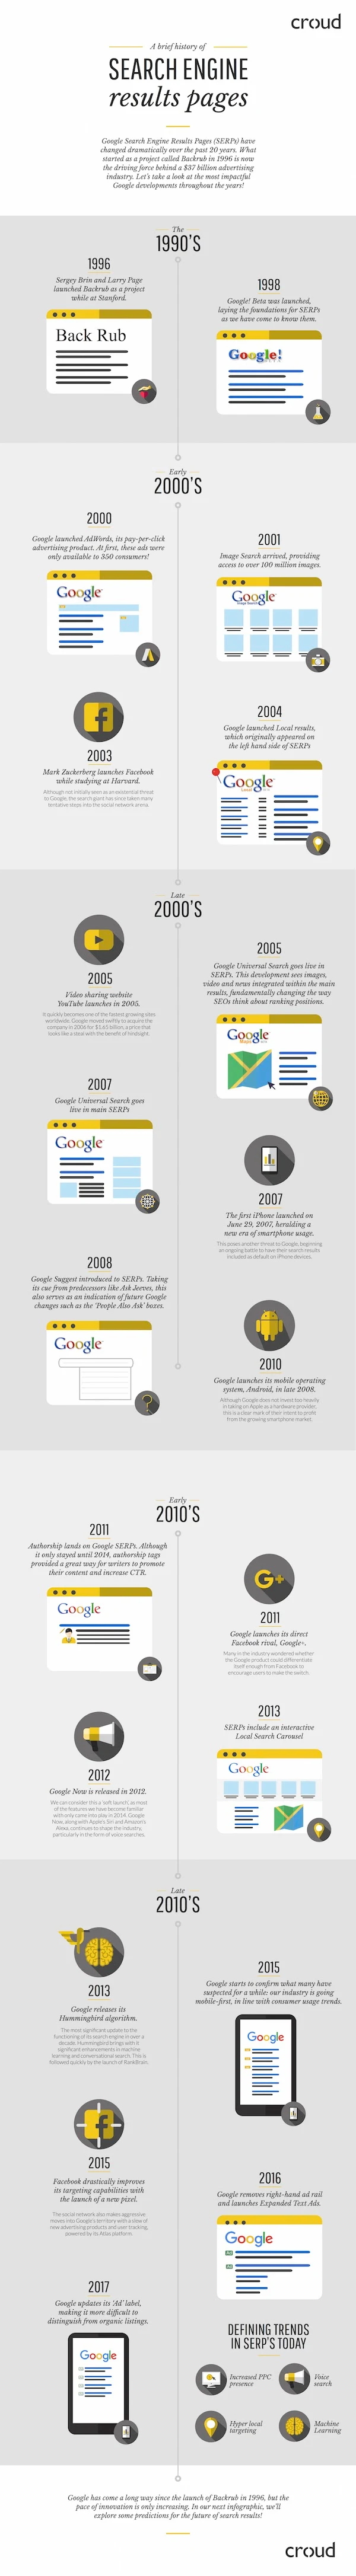 Evolution Of Google Search Engine Result Pages Over The Years - #infographic